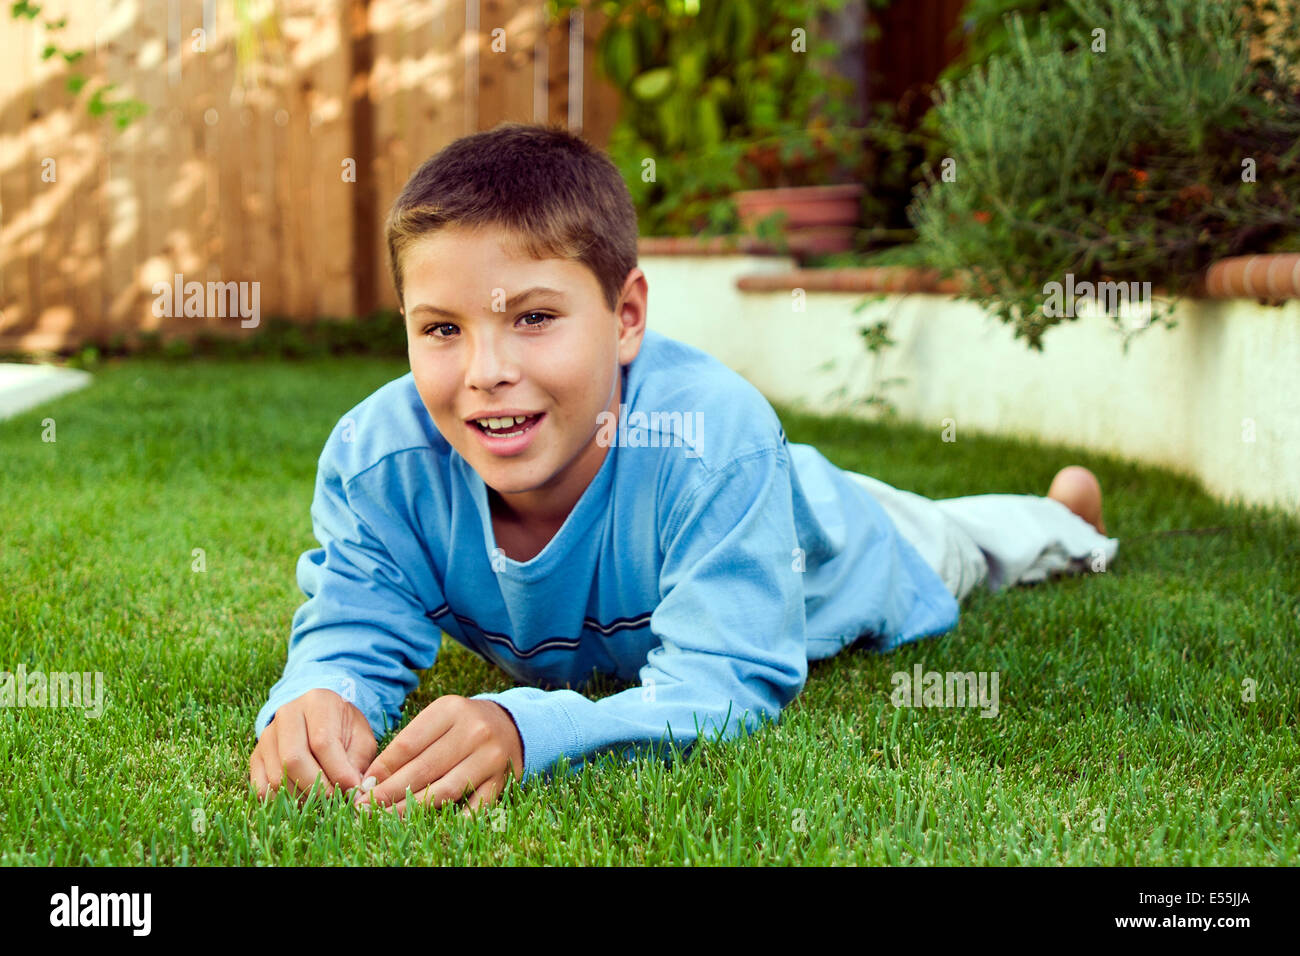 9-10 year old young person people Smiling Japanese/Caucasian boy laying on grass in backyard eye contact MR © Myrleen Pearson Stock Photo